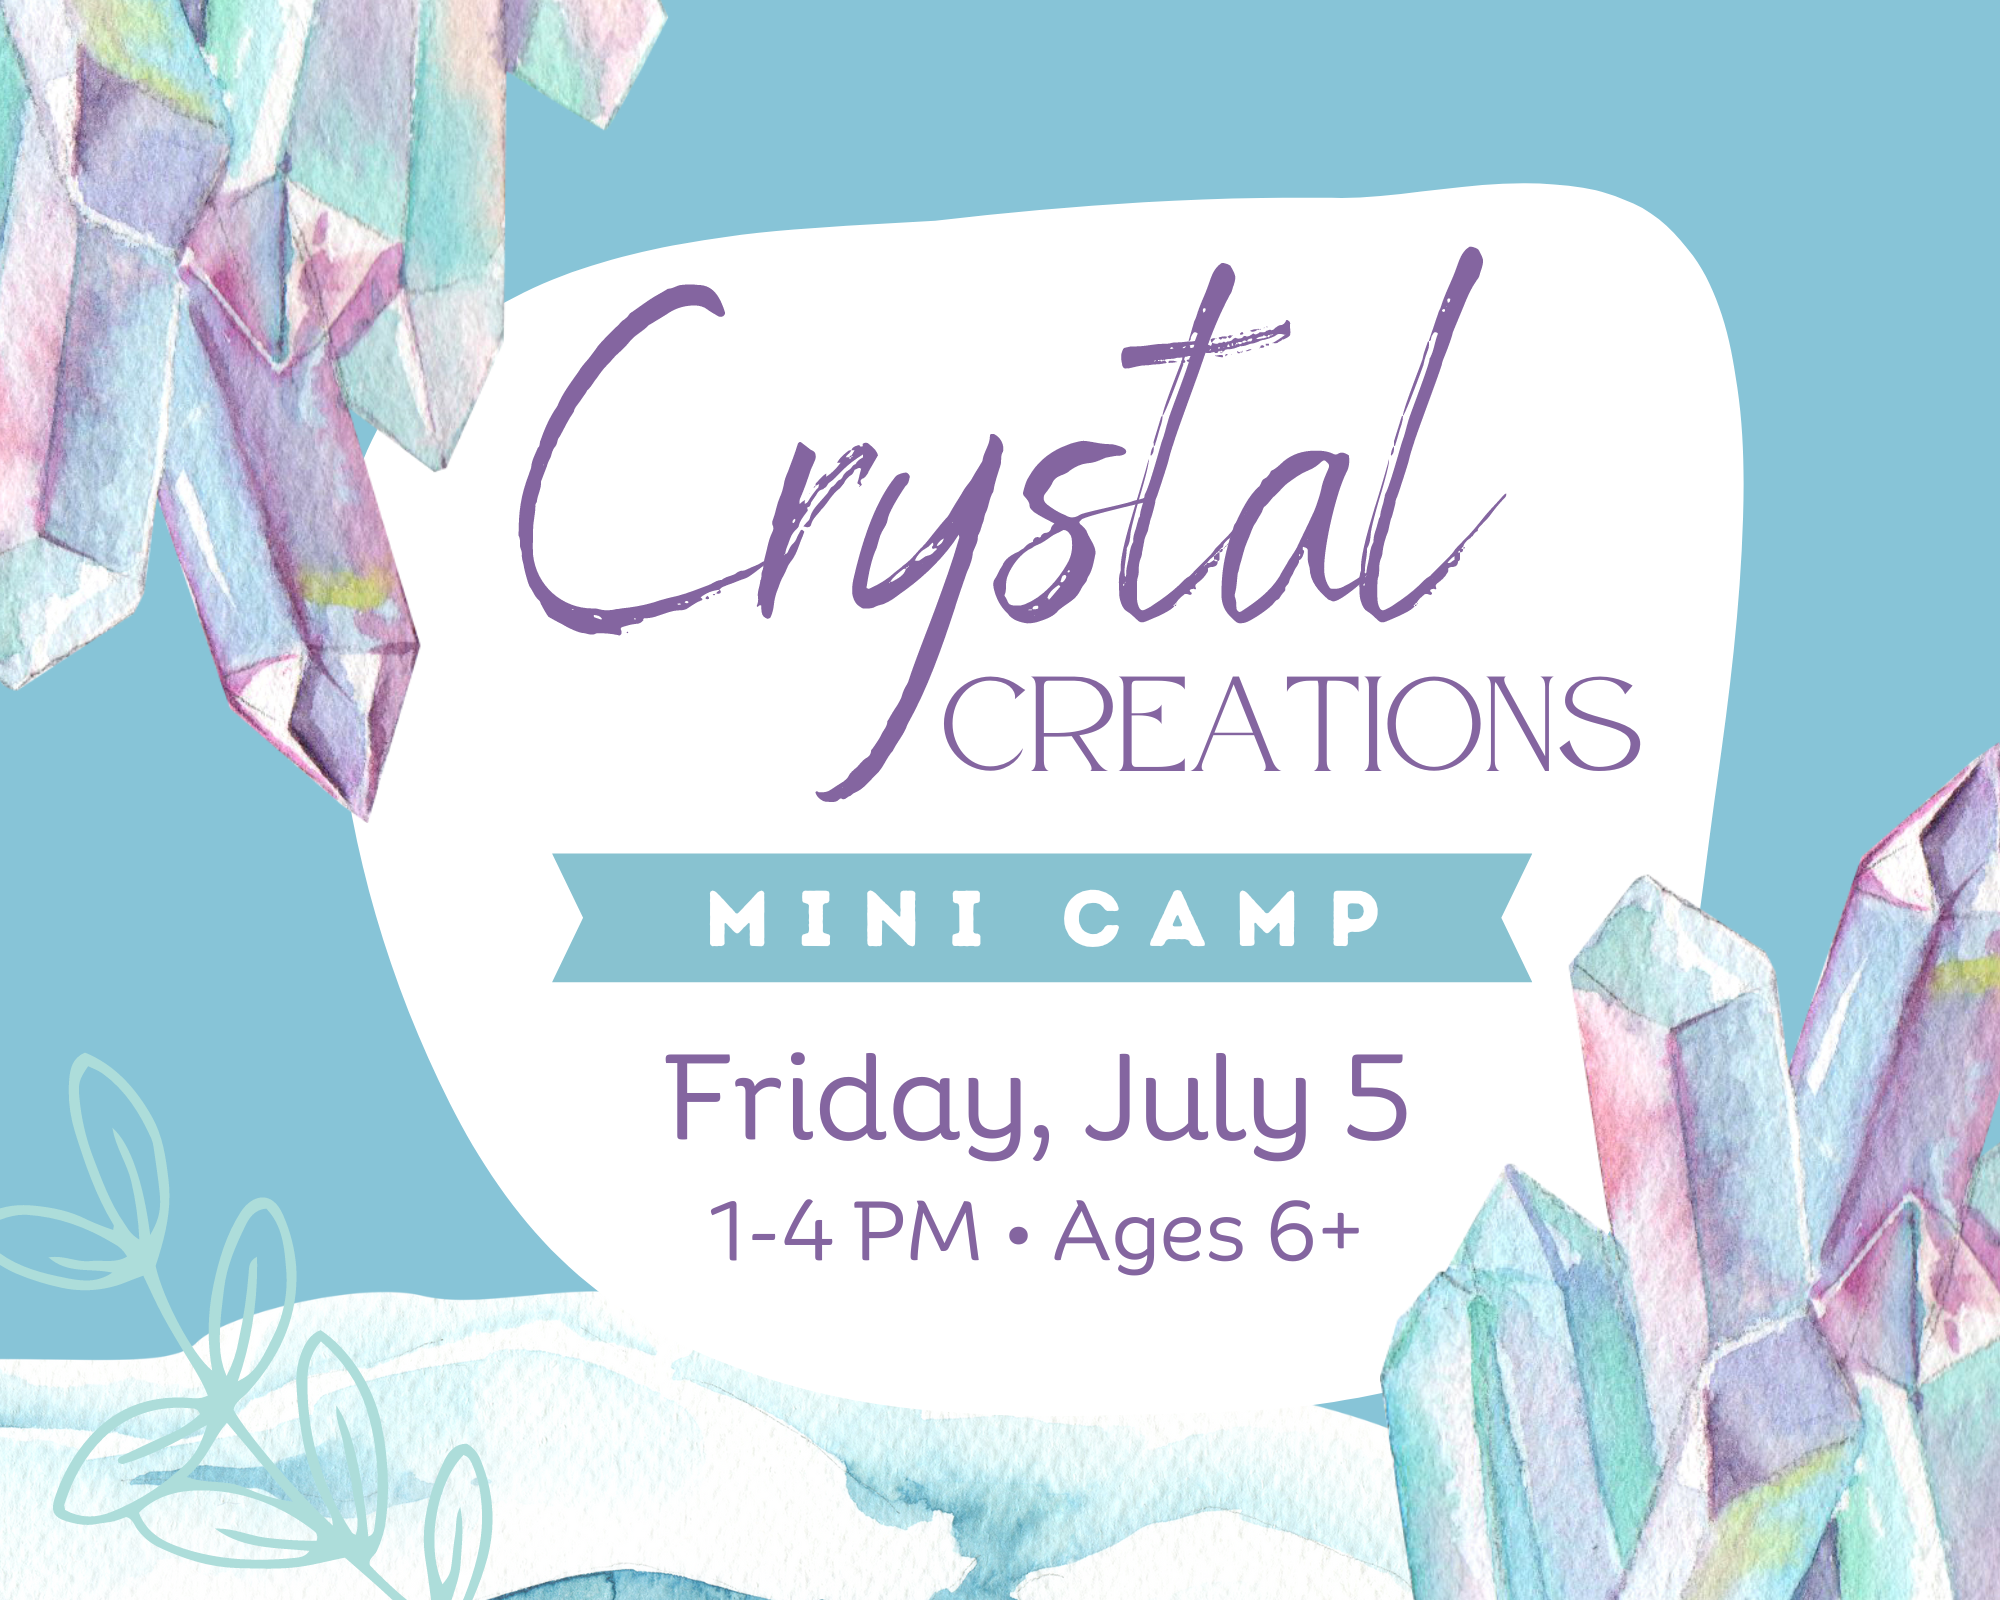 Maker's Summer Camp - Crystal Creations Mini Camp - Week 5 PM - Ages 6+